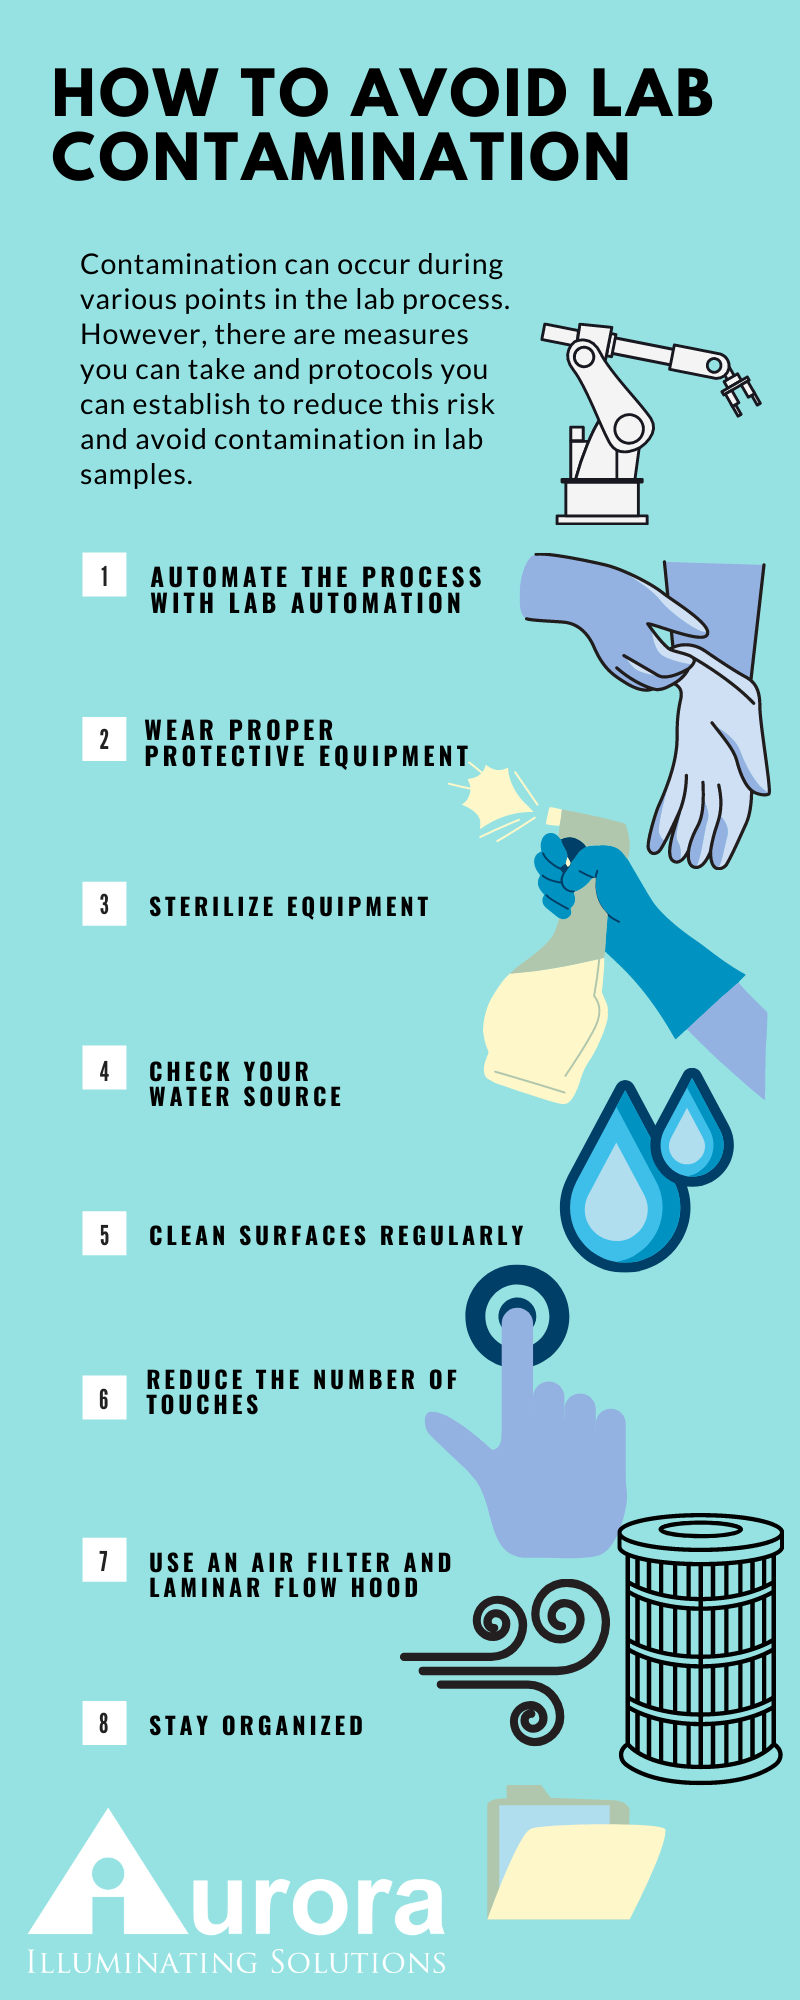 Infographic on how to reduce contamination while working in a lab. How to avoid lab contamination: automate the process, wear protective equipment, sterilize equipment, check your water supply, clean surfaces regularly, reduce the number of touches, use air filters and a laminar flow hood, stay organized.